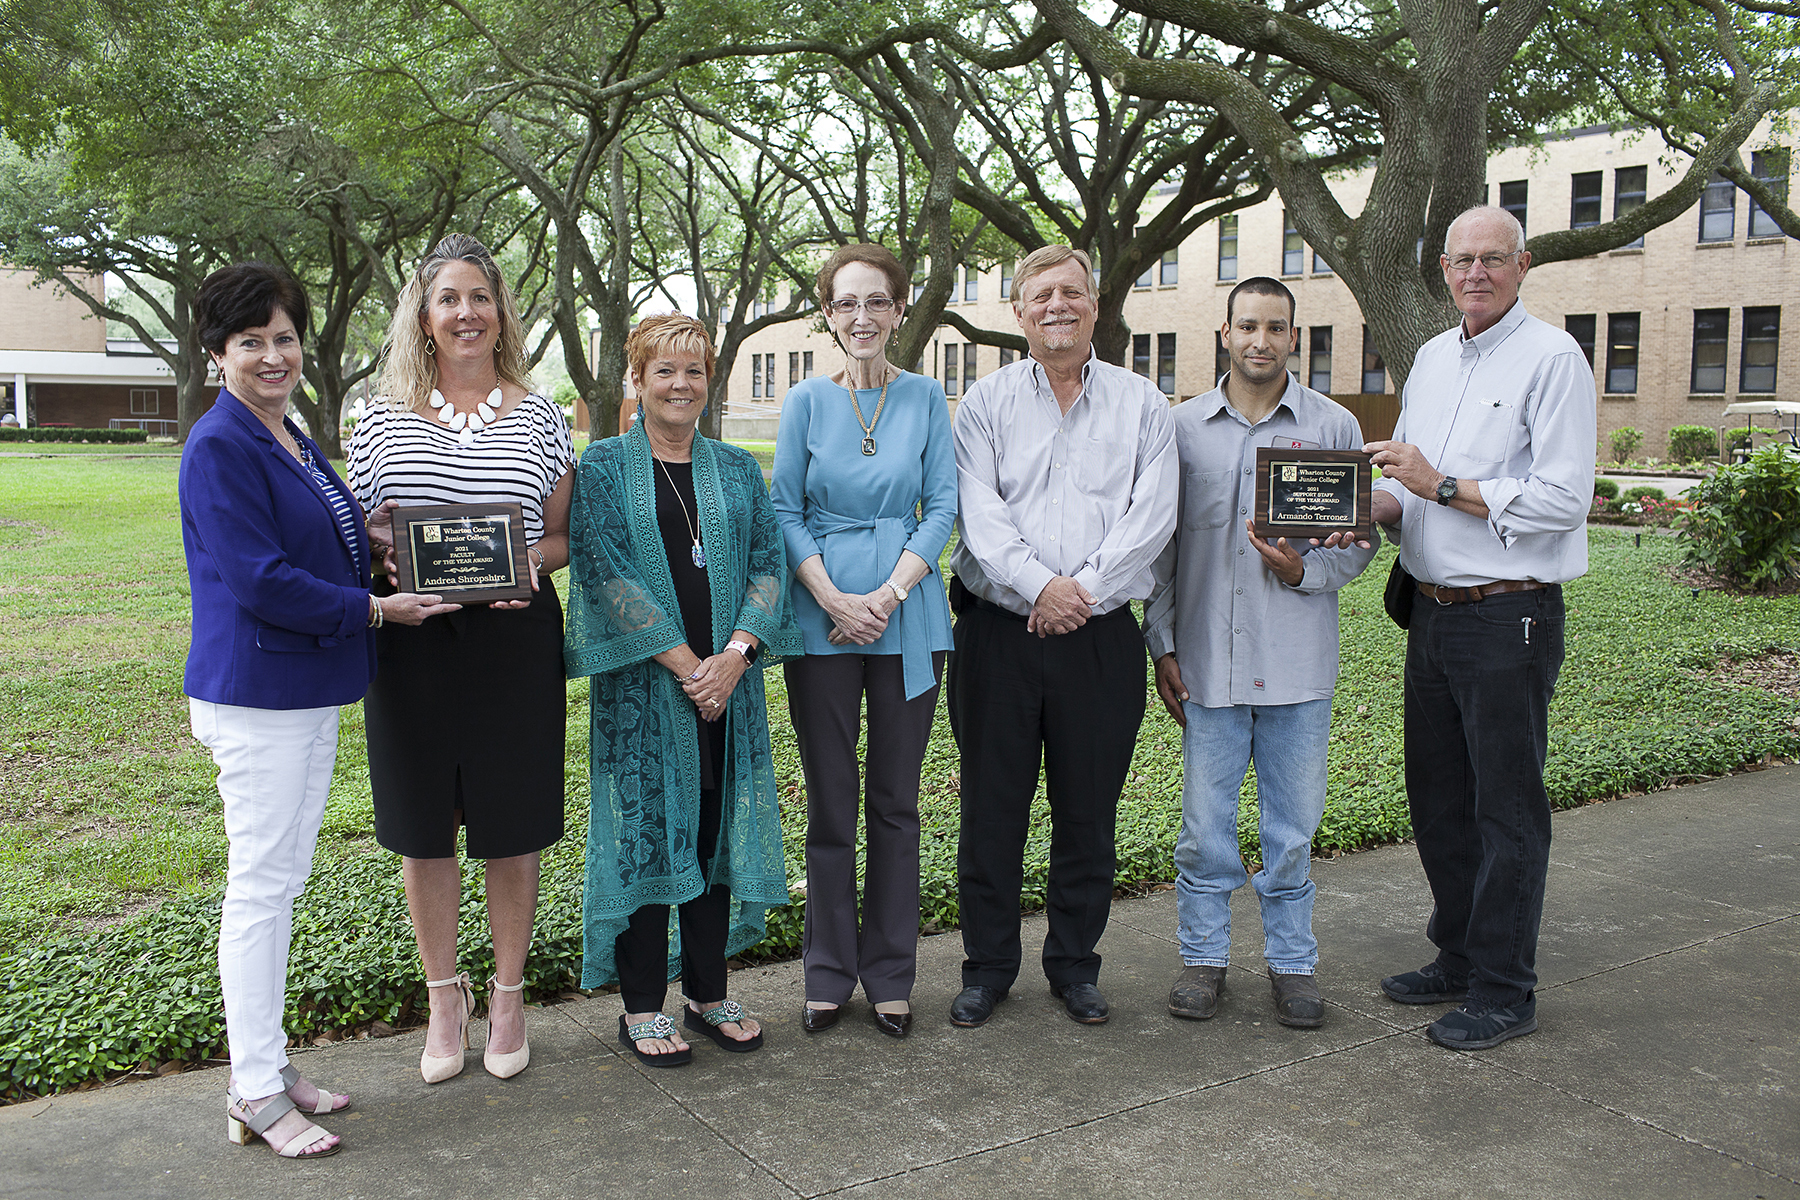 EMPLOYEE RECOGNITION - Awards issued to Faculty of the Year and Support Staff of the Year